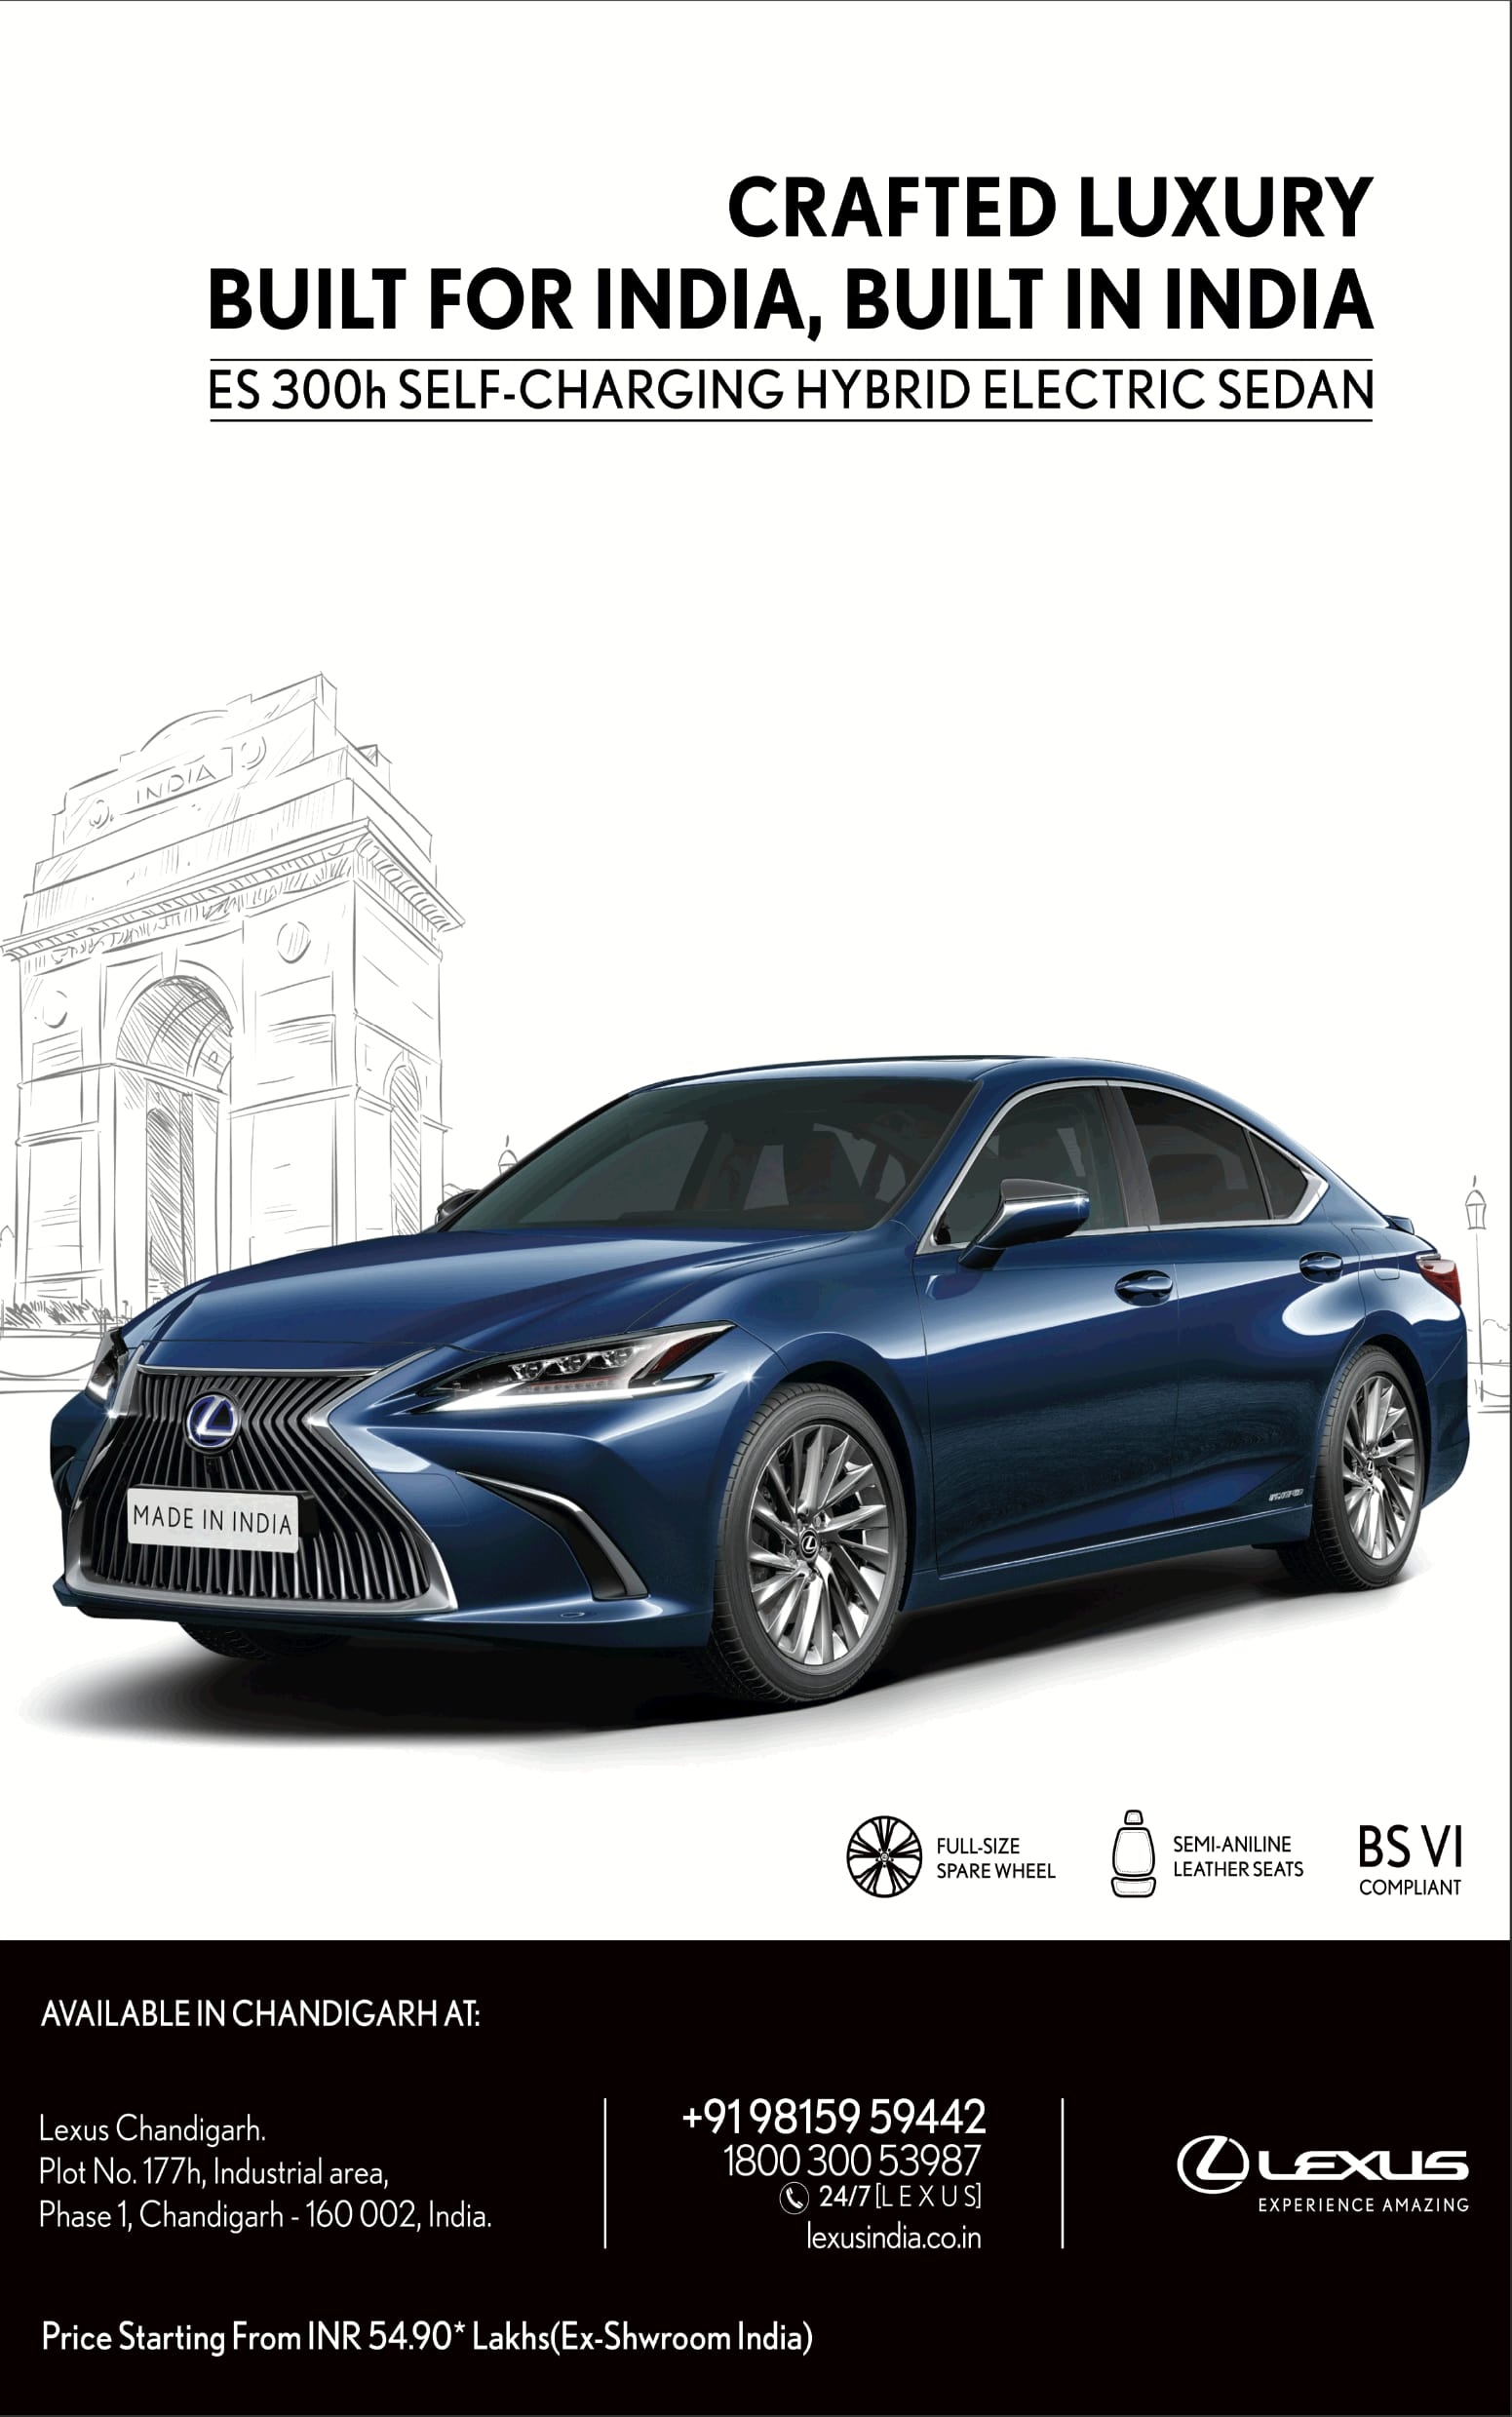 lexus-hybrid-electric-sedan-crafted-luxury-built-for-india-built-in-india-ad-toi-chandigarh-2-11-2020